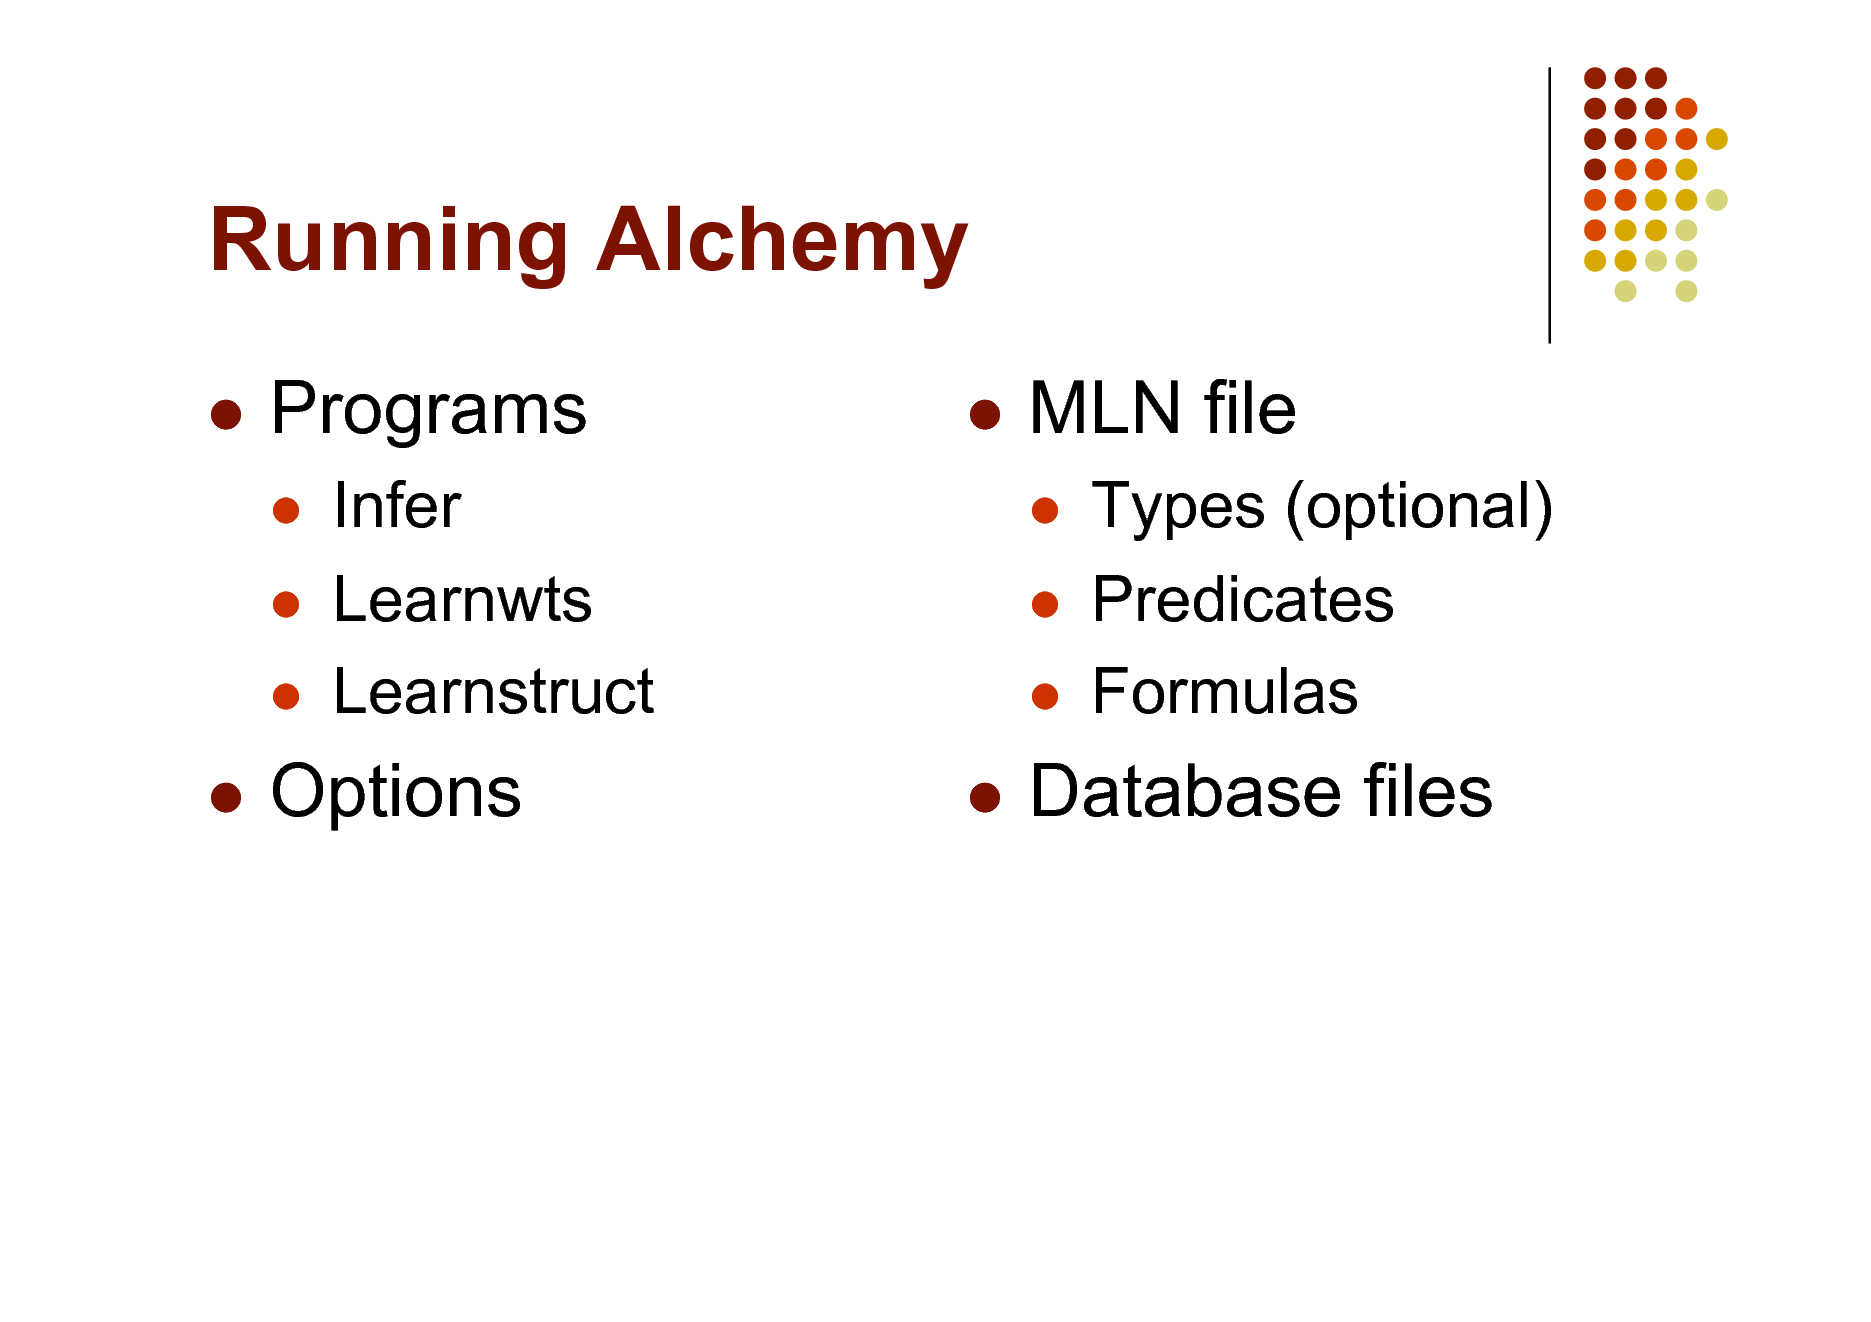 Slide: Running Alchemy


Programs
  



MLN file
  

Infer Learnwts Learnstruct


Types (optional) Predicates Formulas



Options

Database files

